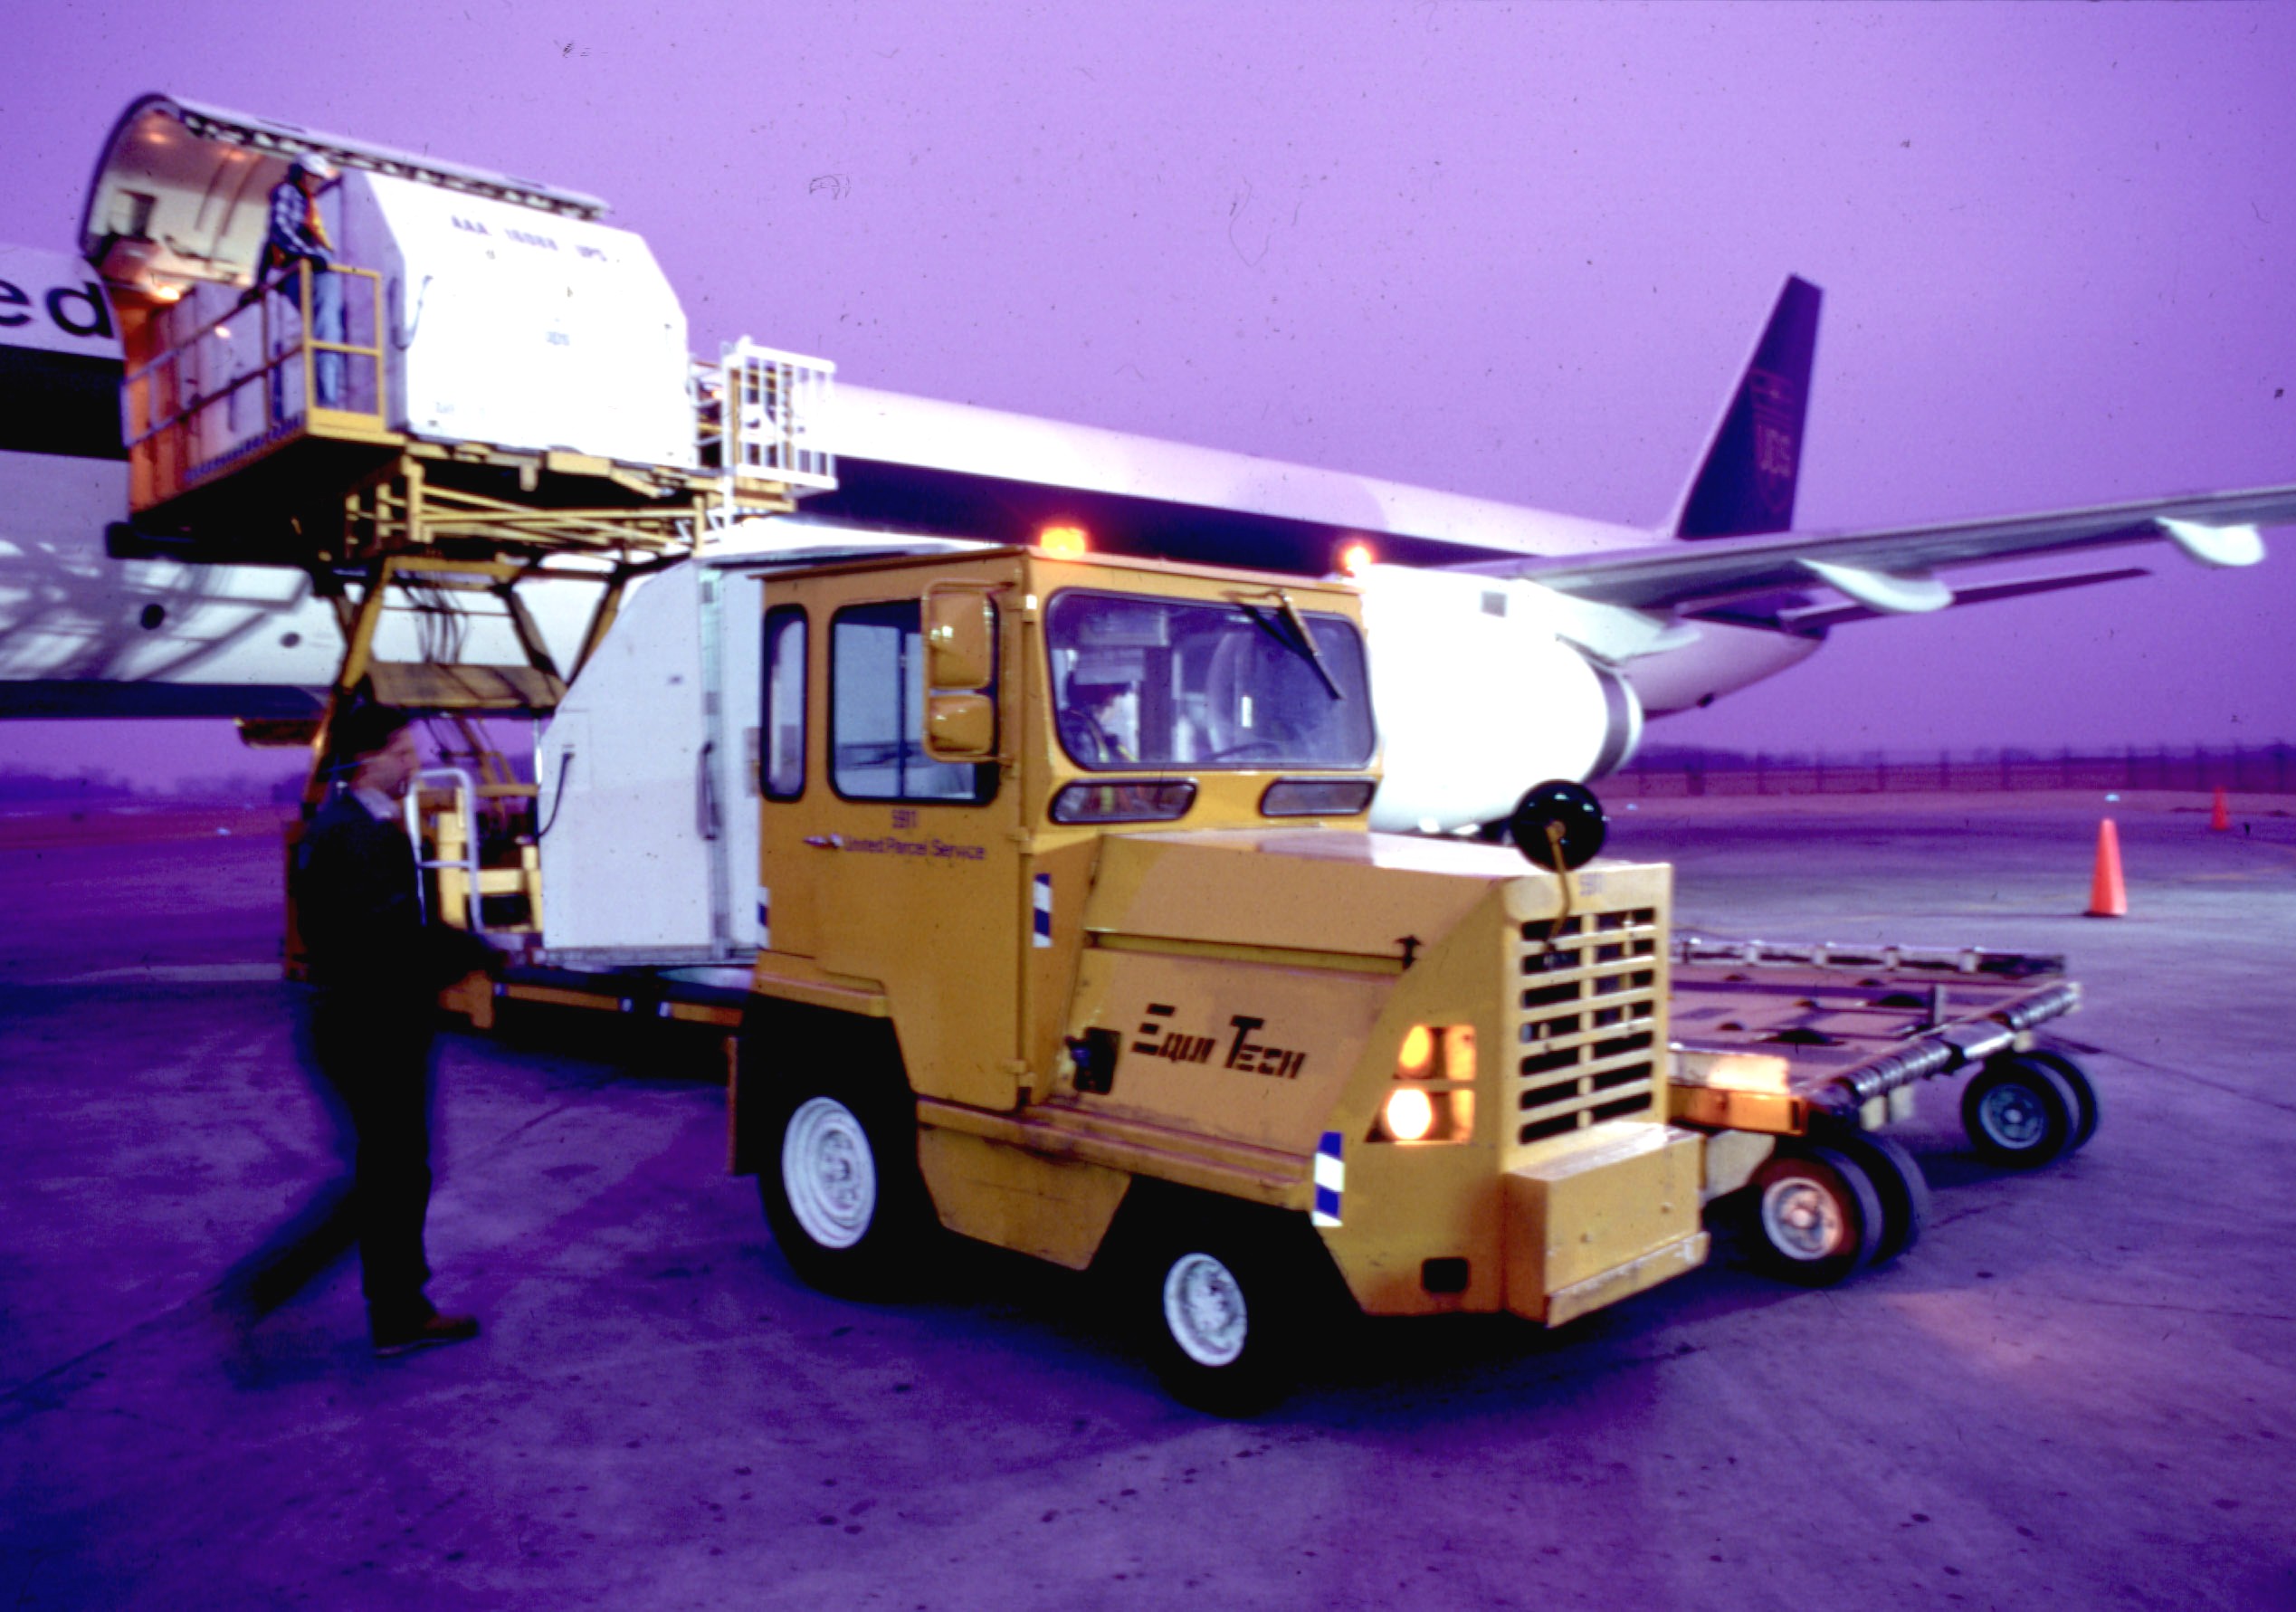 cargo being loaded onto an airplane